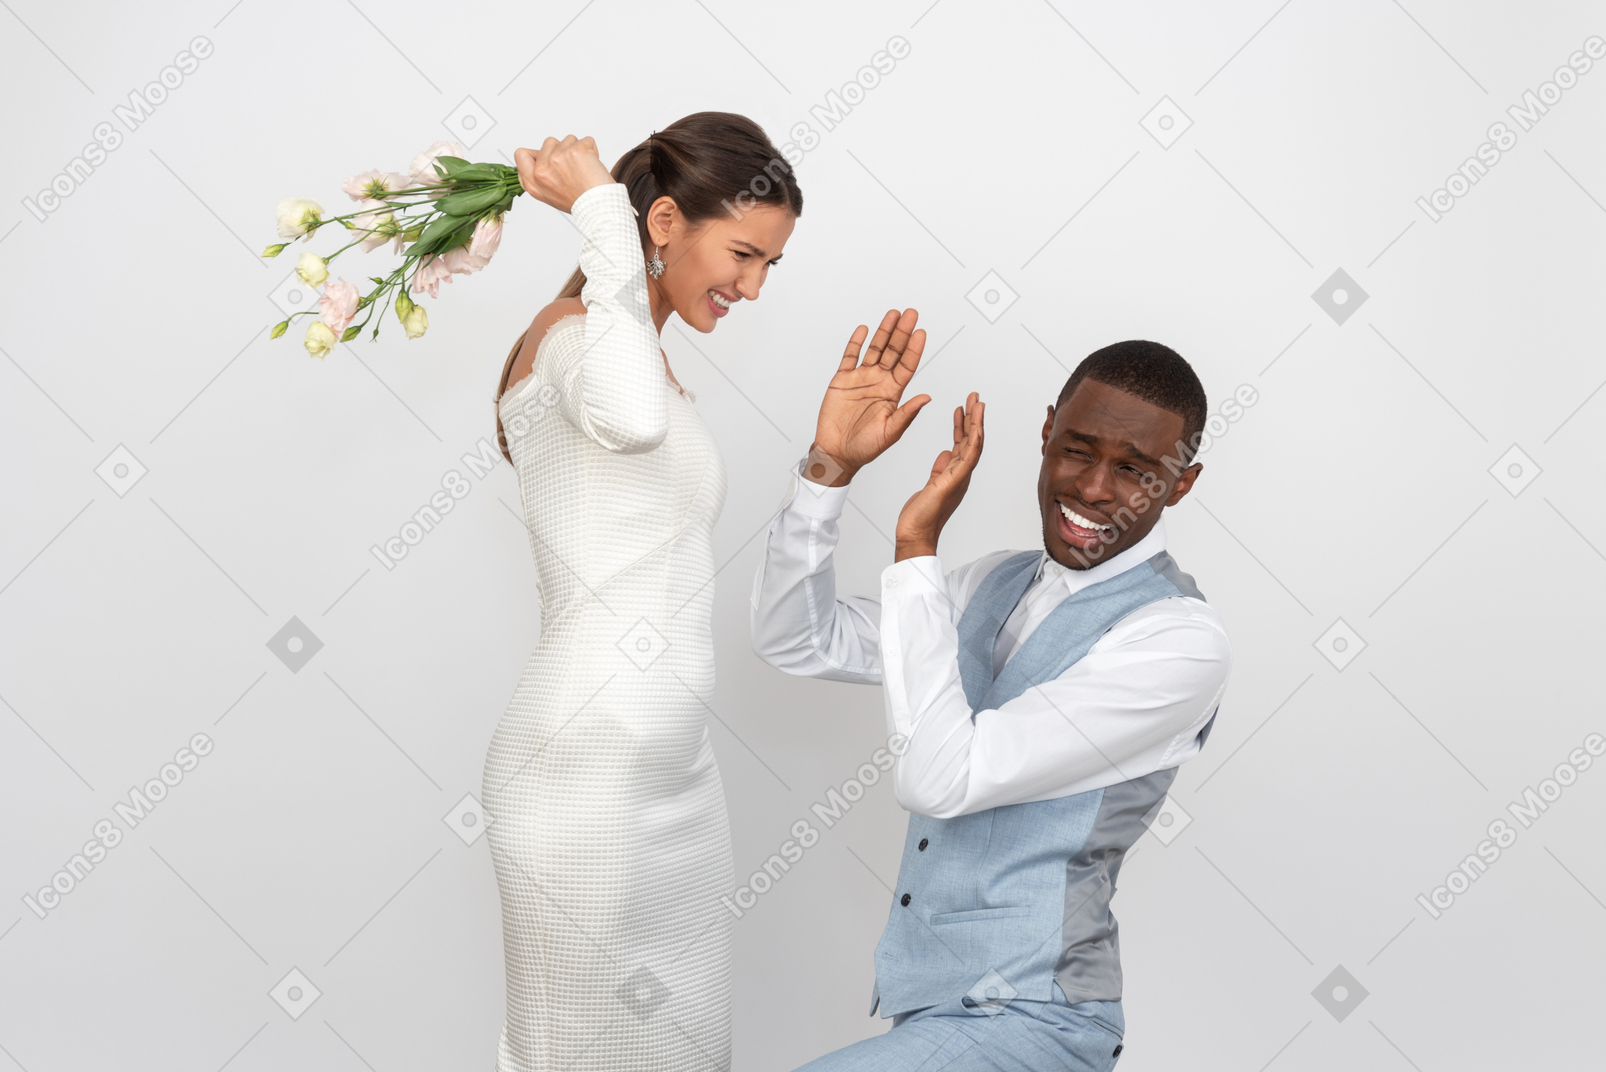 Bride is going to punch her groom with the bouquet